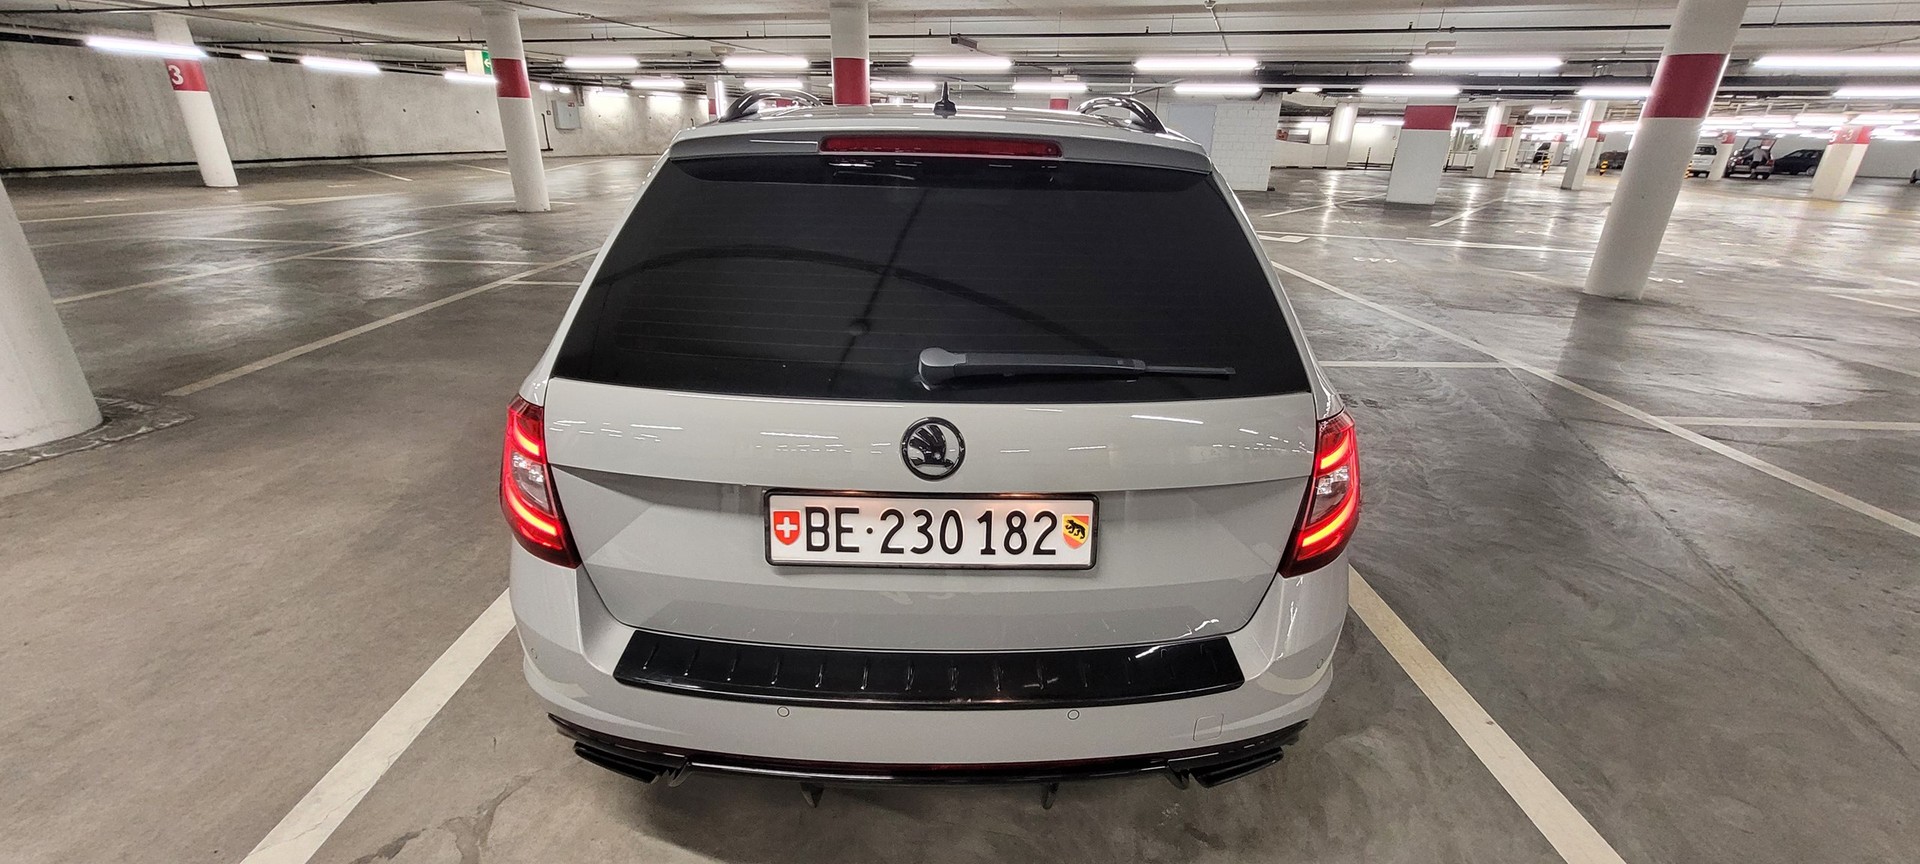 SKODA OCTAVIA COMBI skoda rs 230 - 310ps - tuning - bodykit - standheizung  - vollausstattung - ab mfk/service occasion - Le Parking